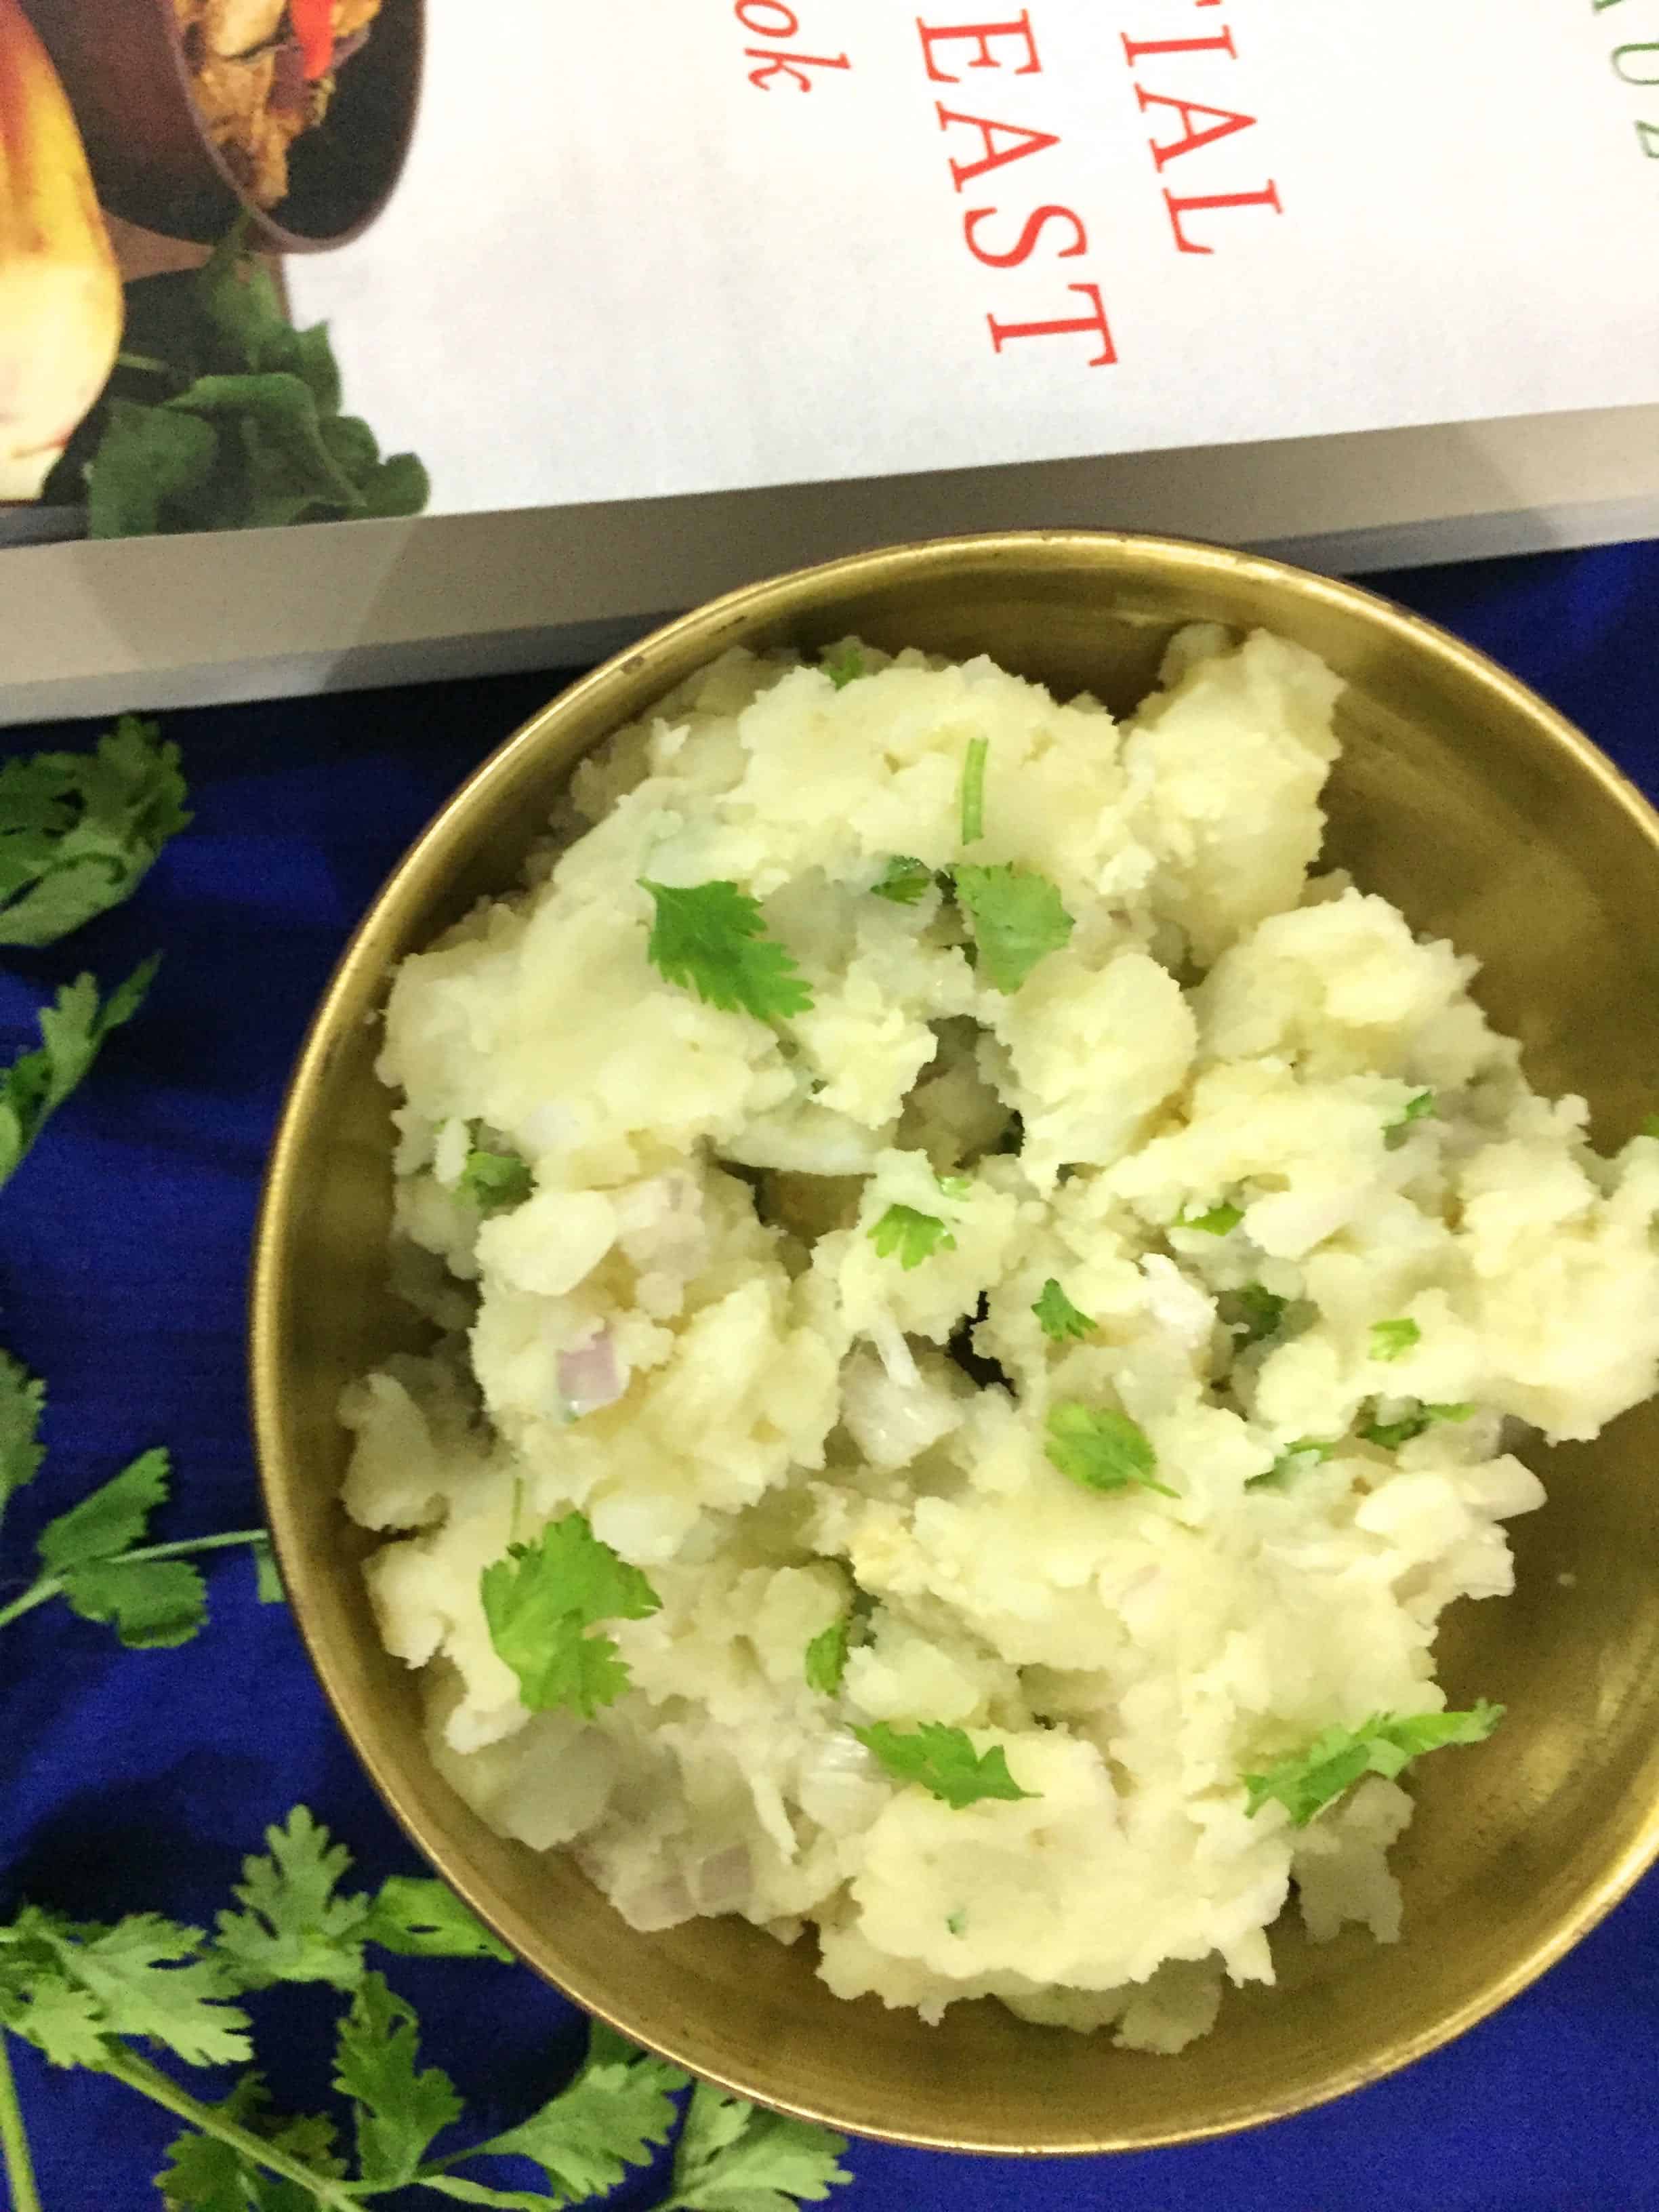 Alu Pitika - mashed potatoes in a bowl with cilantro garnish and a book just visible at the edge